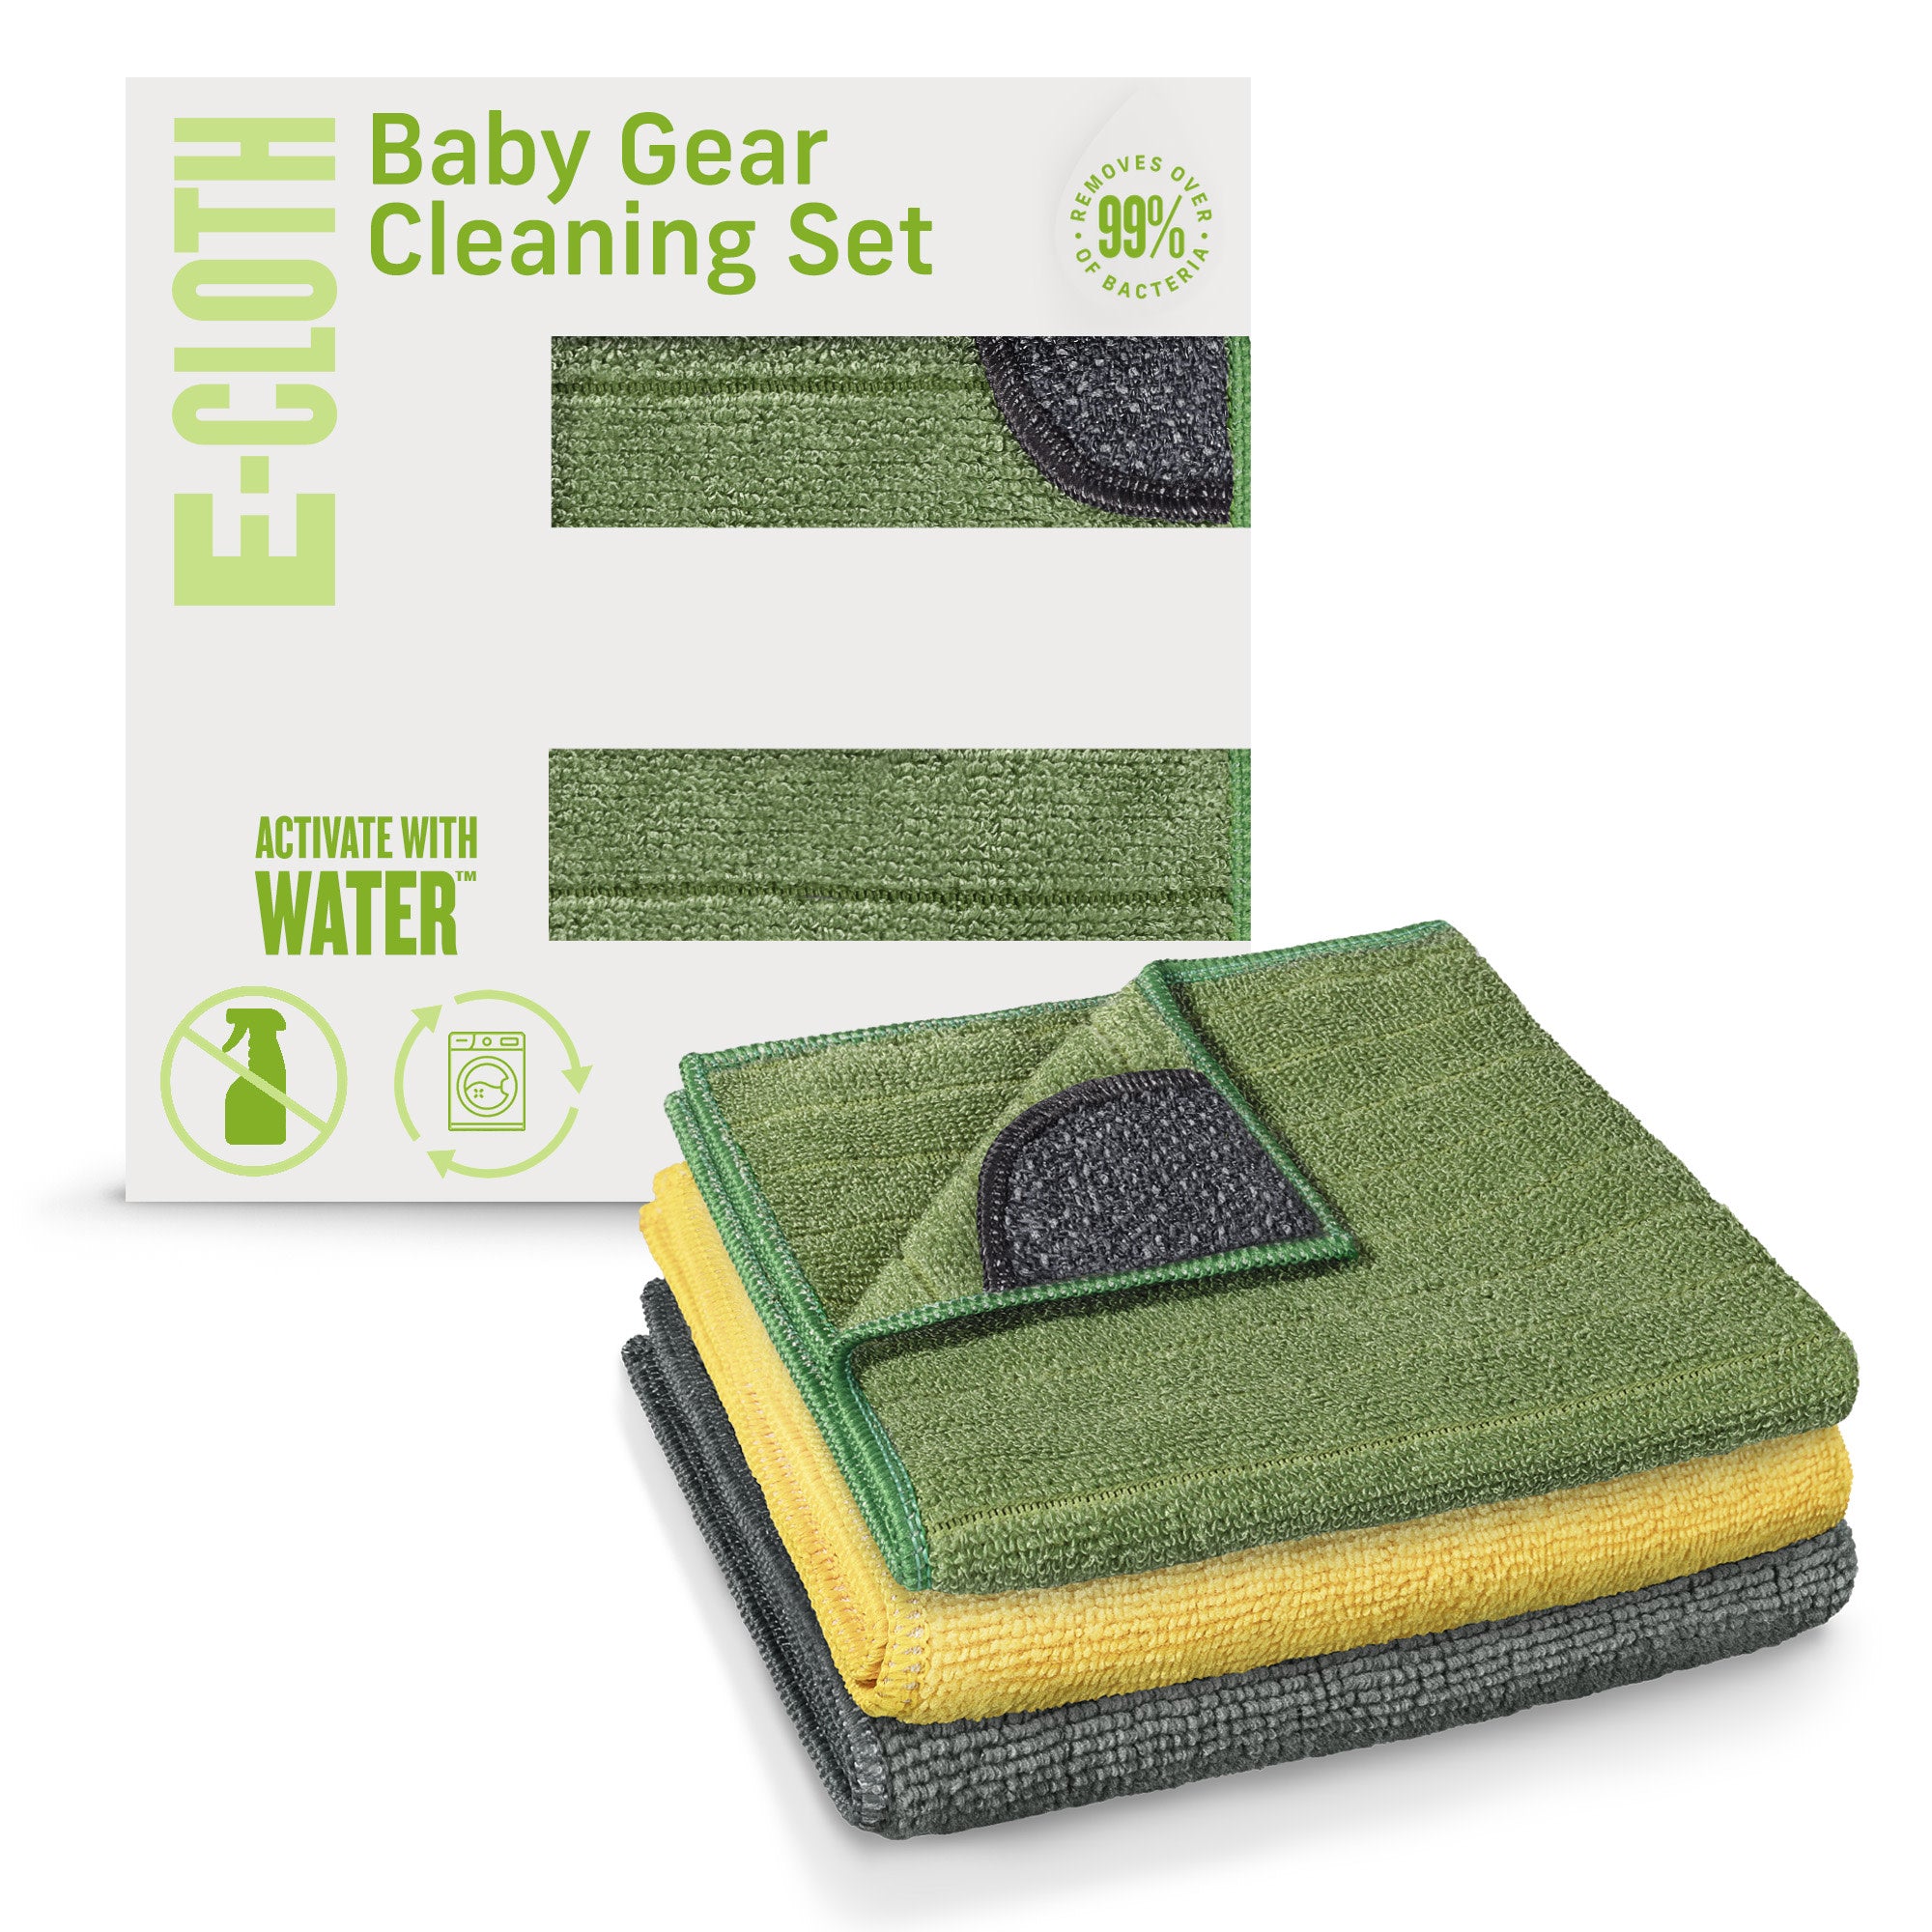 E-Cloth Baby Gear Microfiber Cleaning Cloth Kit for Baby High Chairs, Car Seat, Stroller, Nursery Toys